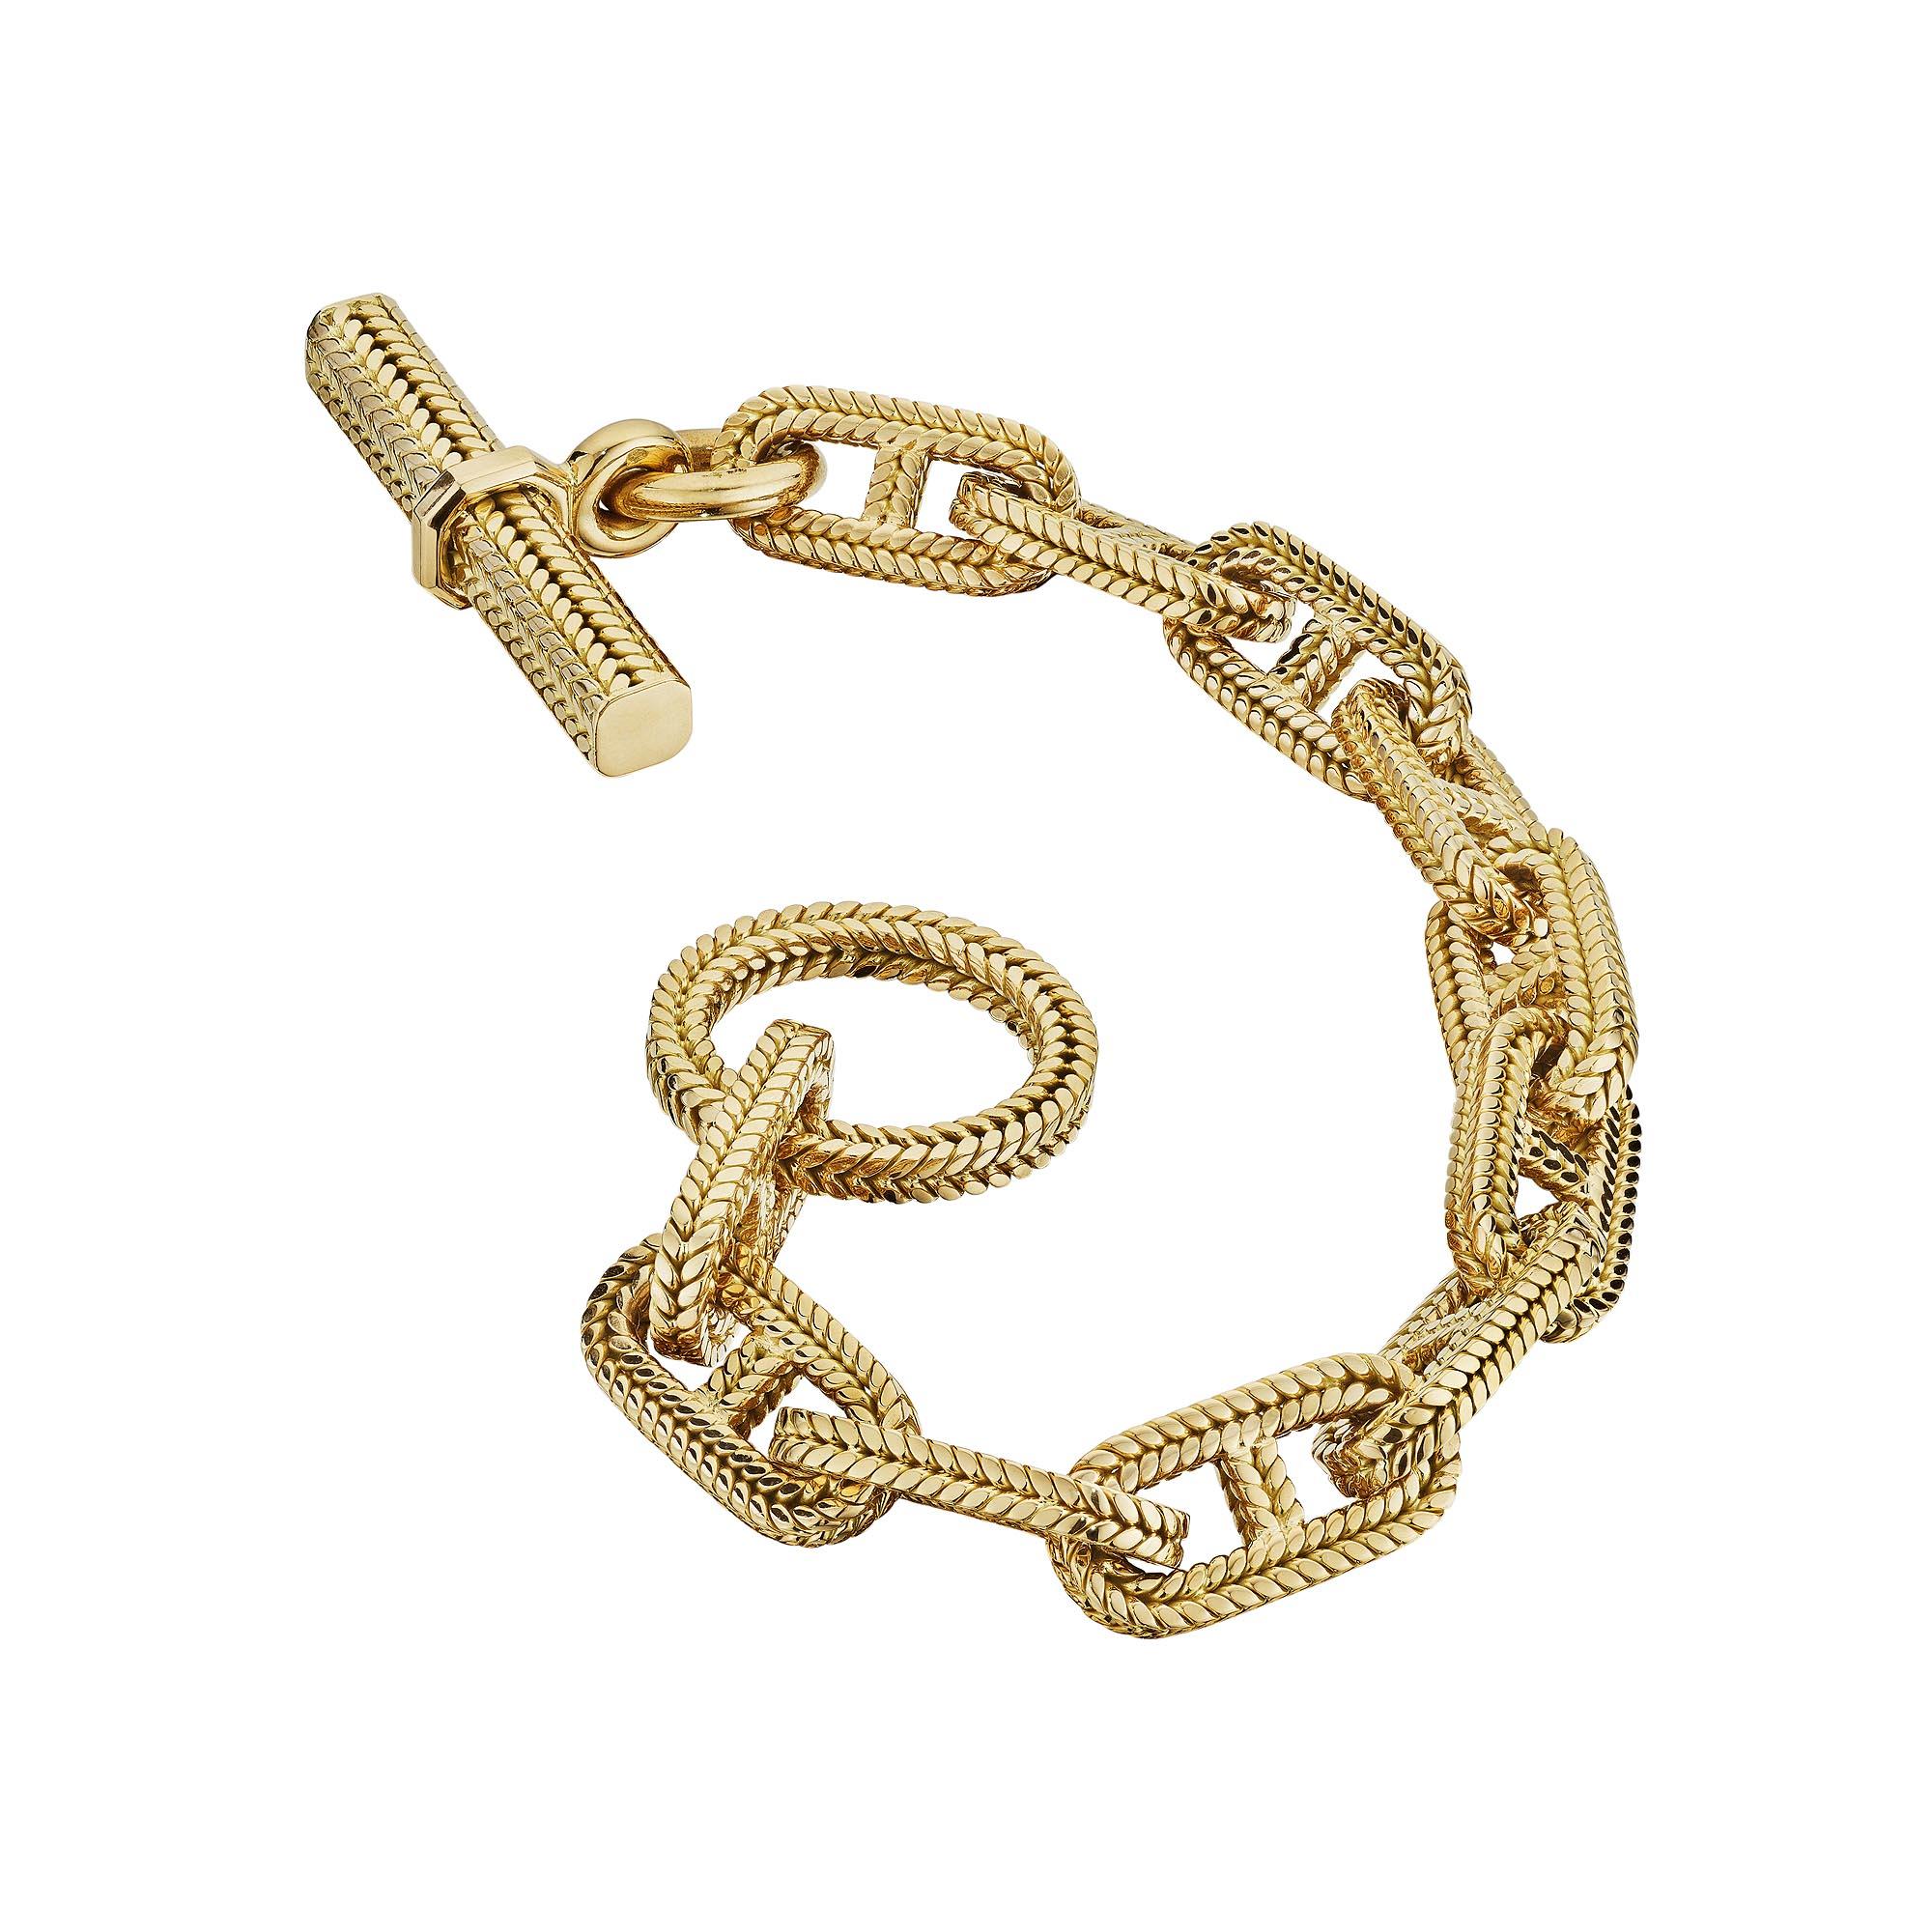 Big, bold, and chunky this rare large size Hermes Georges L'Enfant Paris 'chaine d'ancre' vintage toggle link bracelet is the statement piece you have been searching for.  With ten links weighing 89.2 grams, this woven herringbone 18 karat yellow